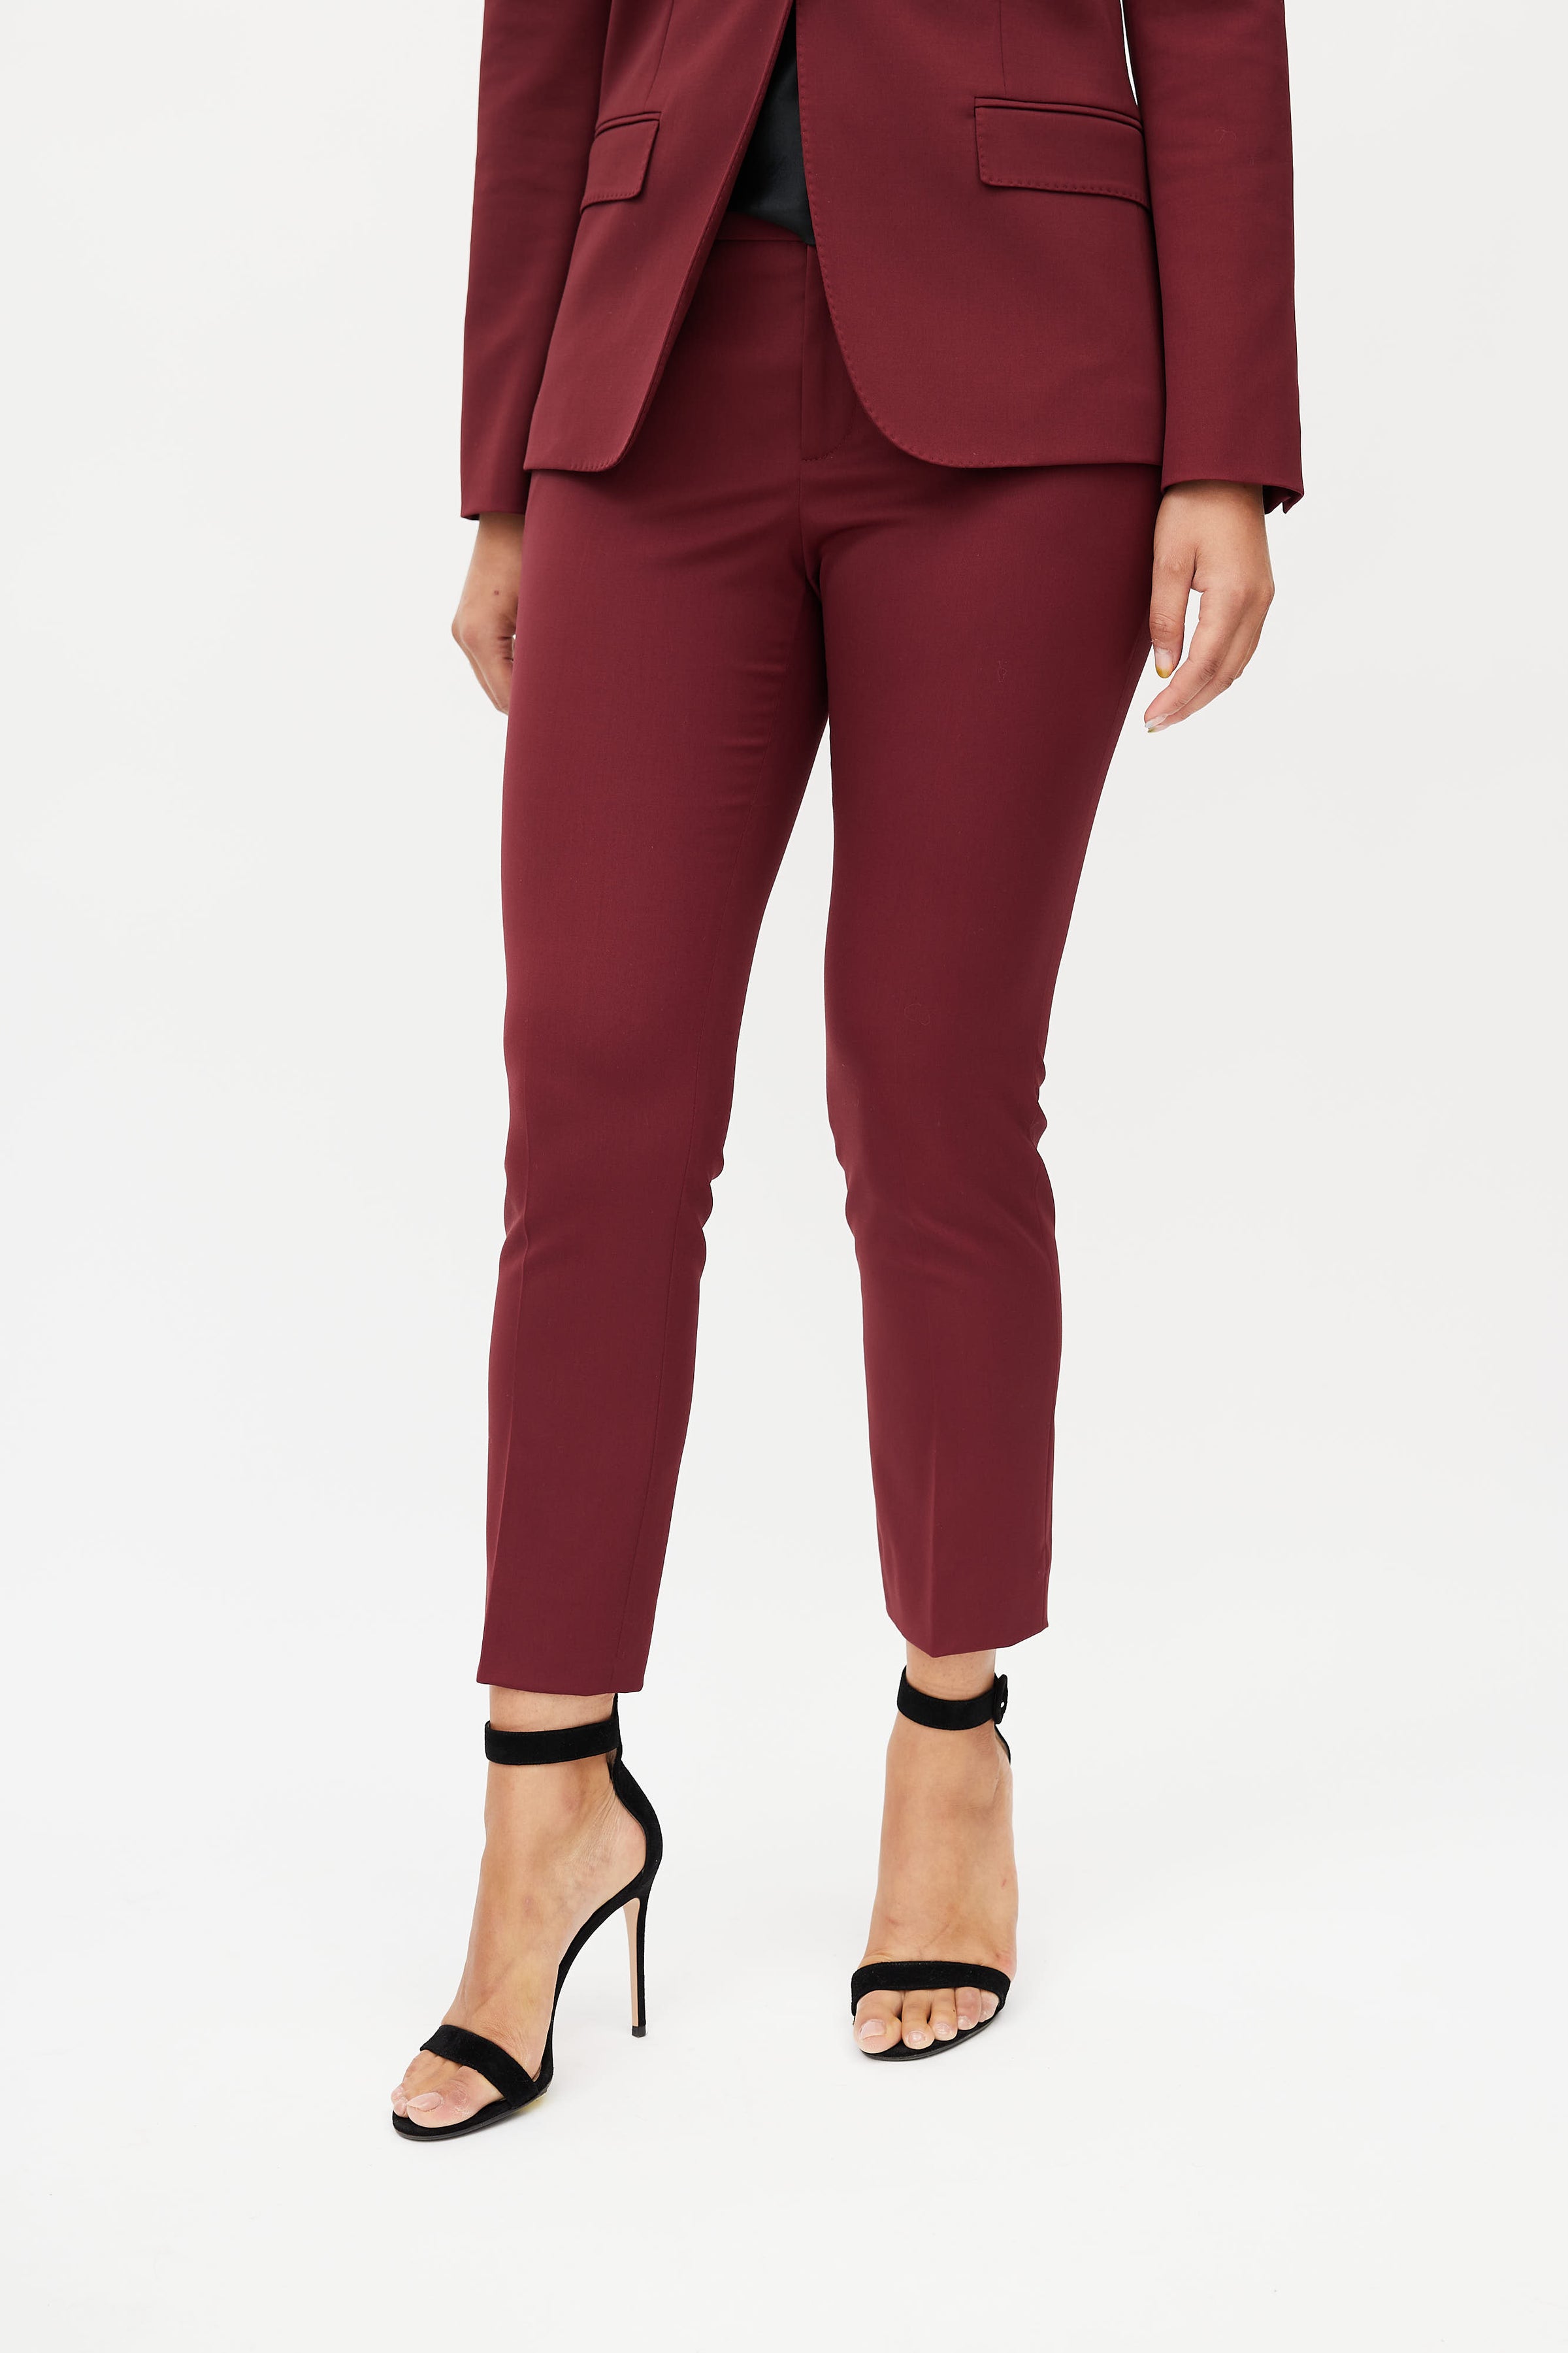 The Pant Suit for Young Professional Women